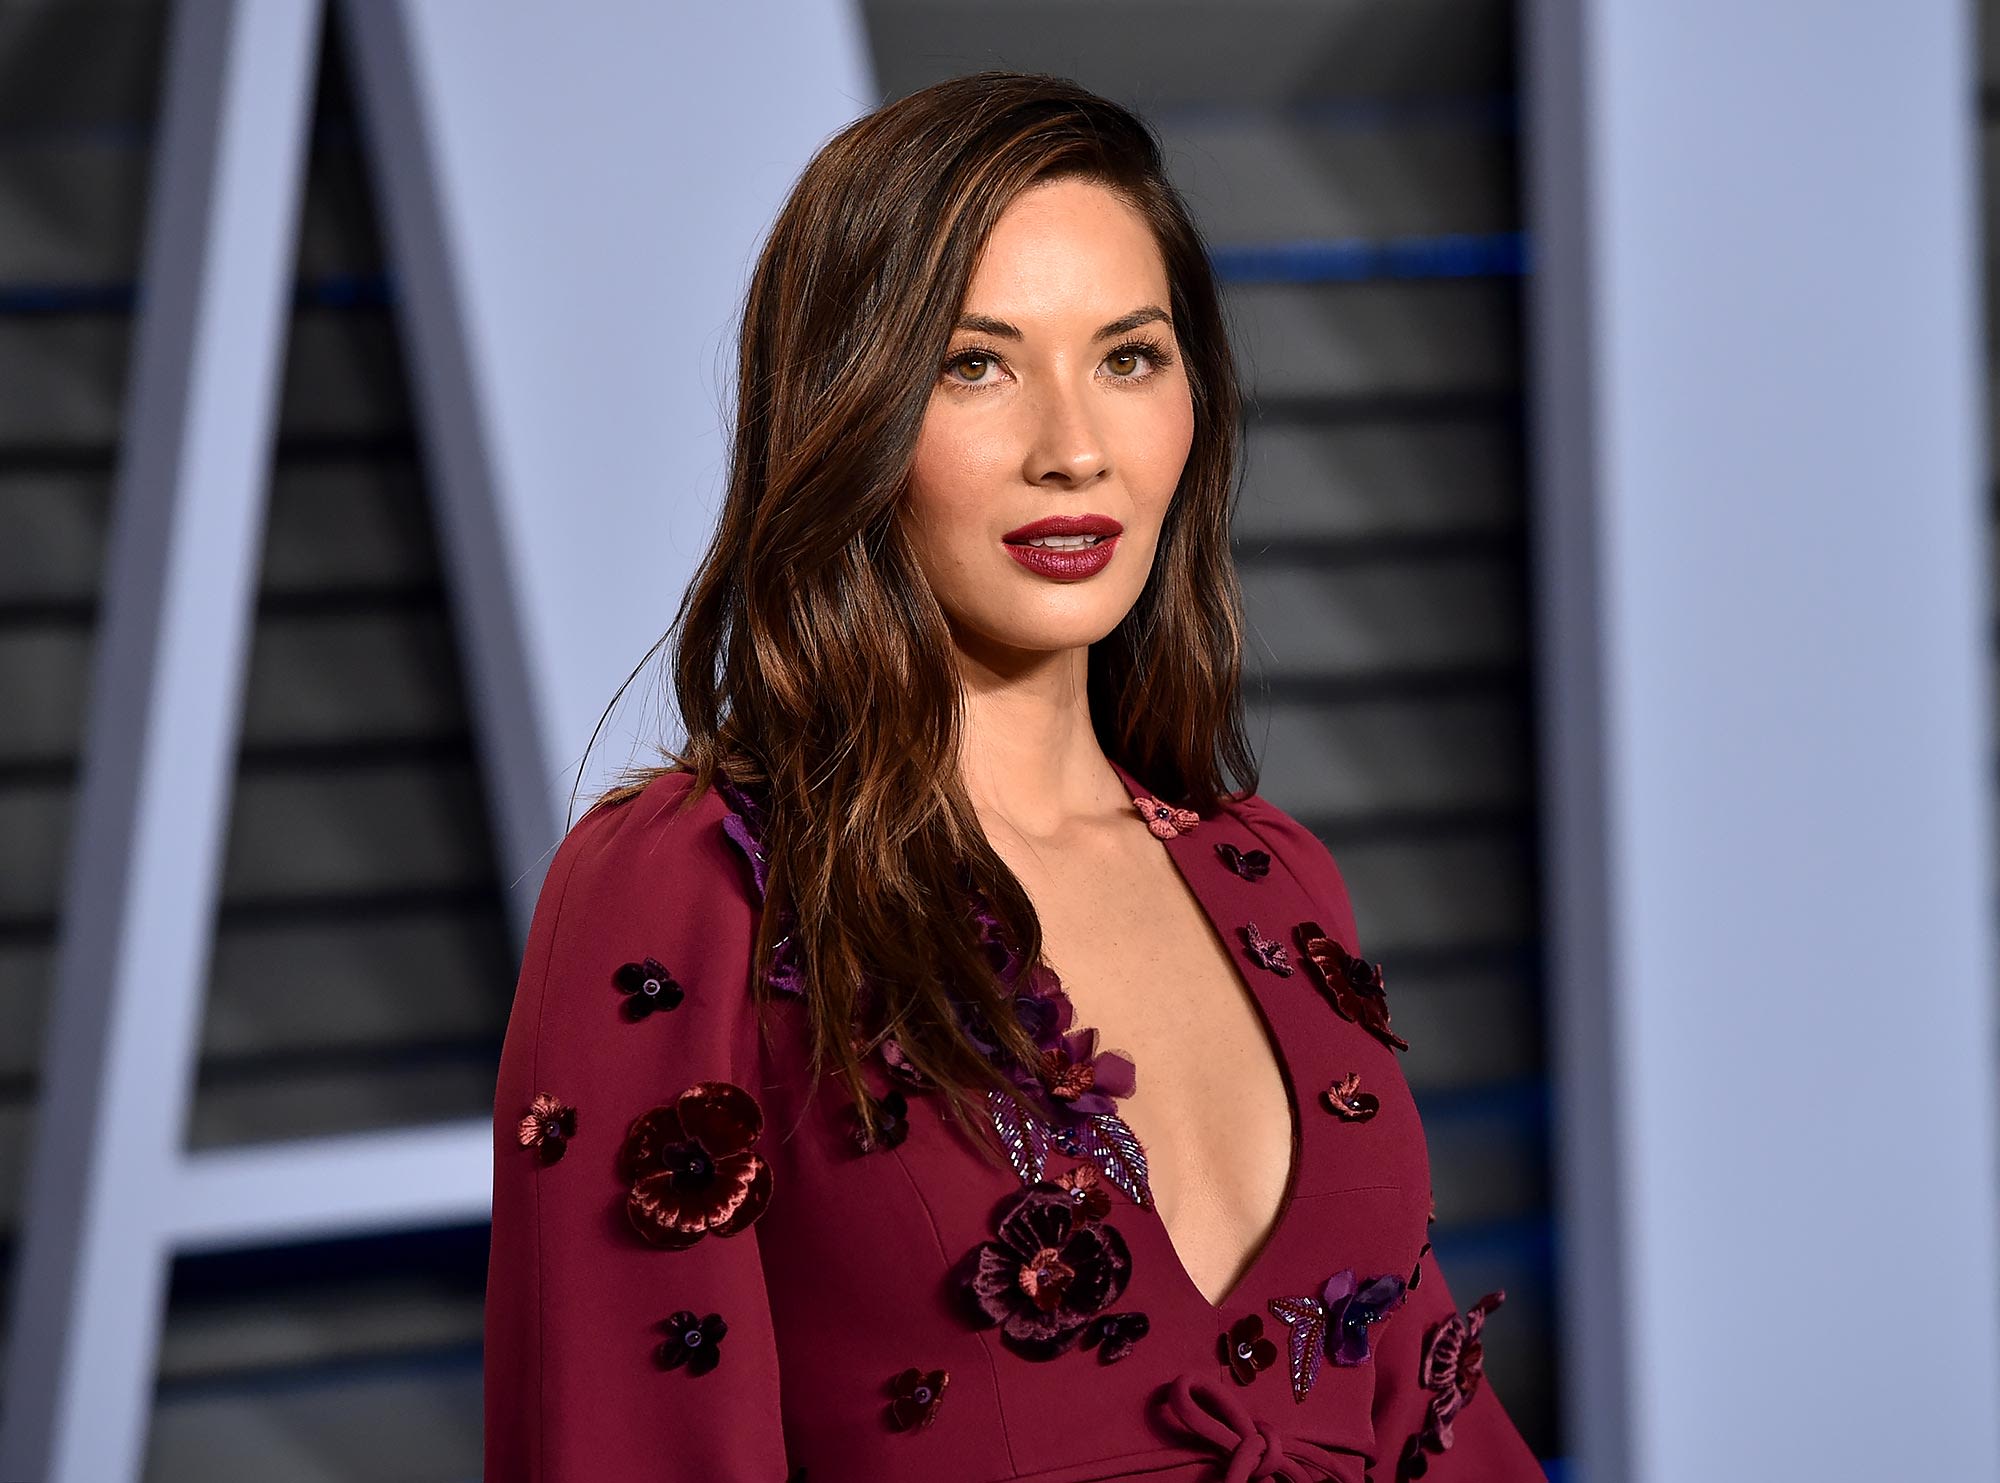 Olivia Munn Was ‘Devastated’ and ‘Didn’t Recognize’ Herself After Double Mastectomy: ‘I Cried’